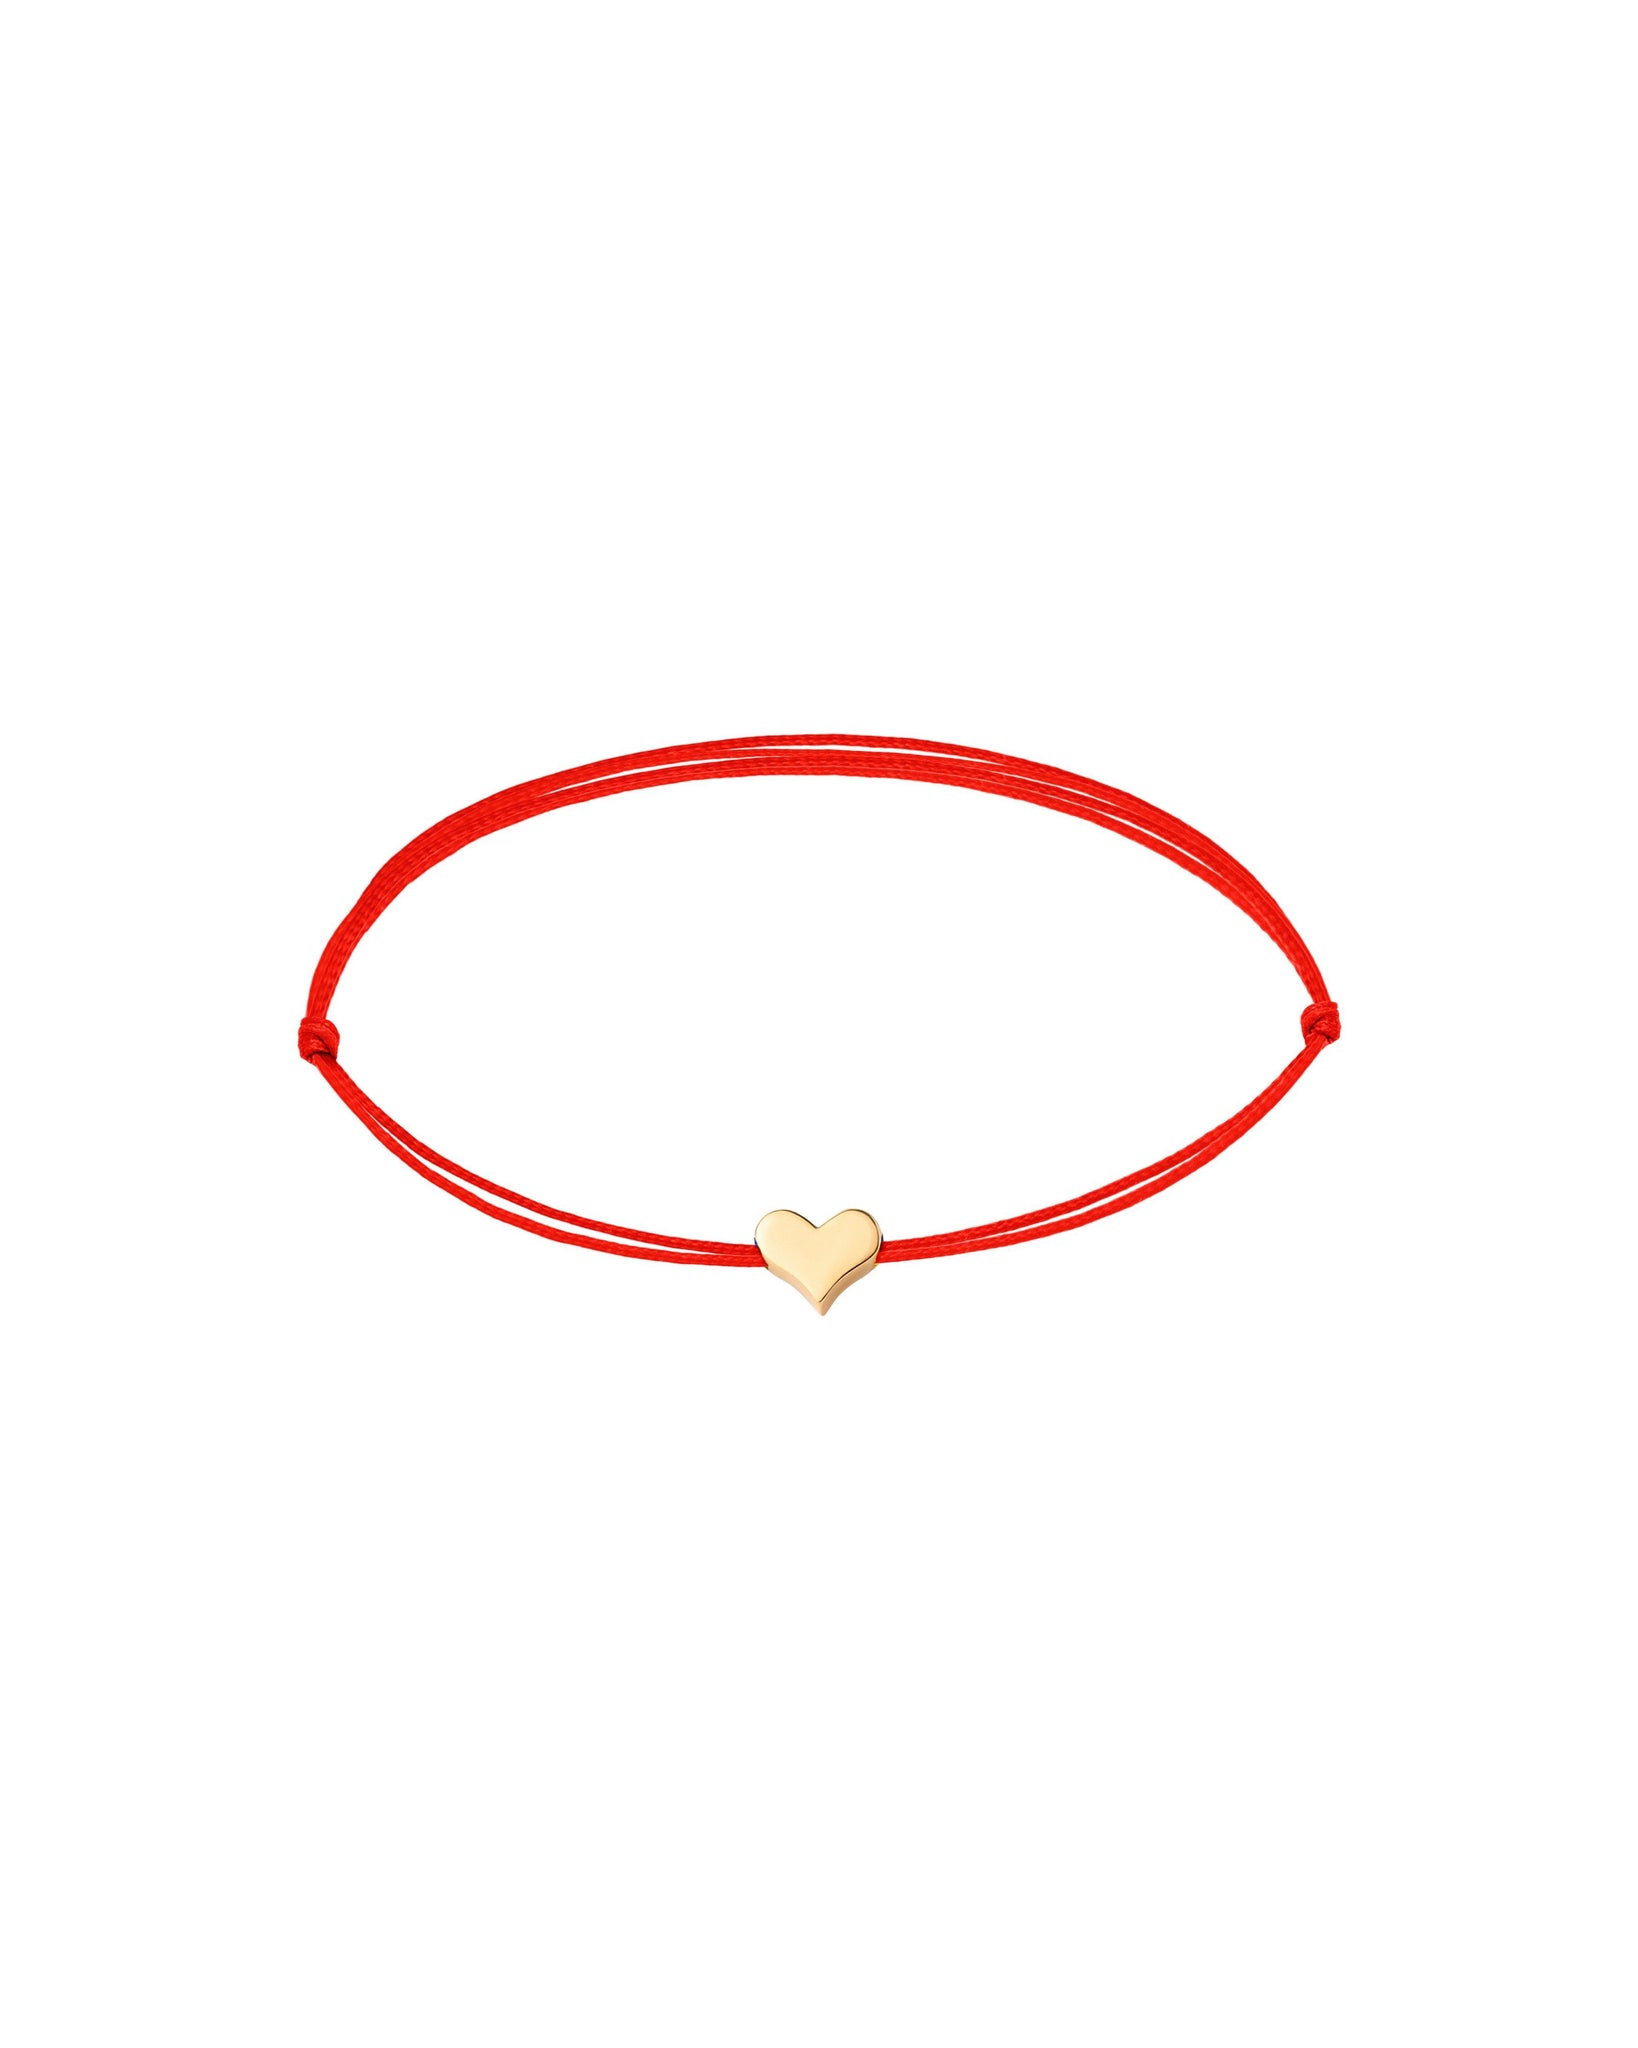 Red Thread with Gold Heart Bracelet